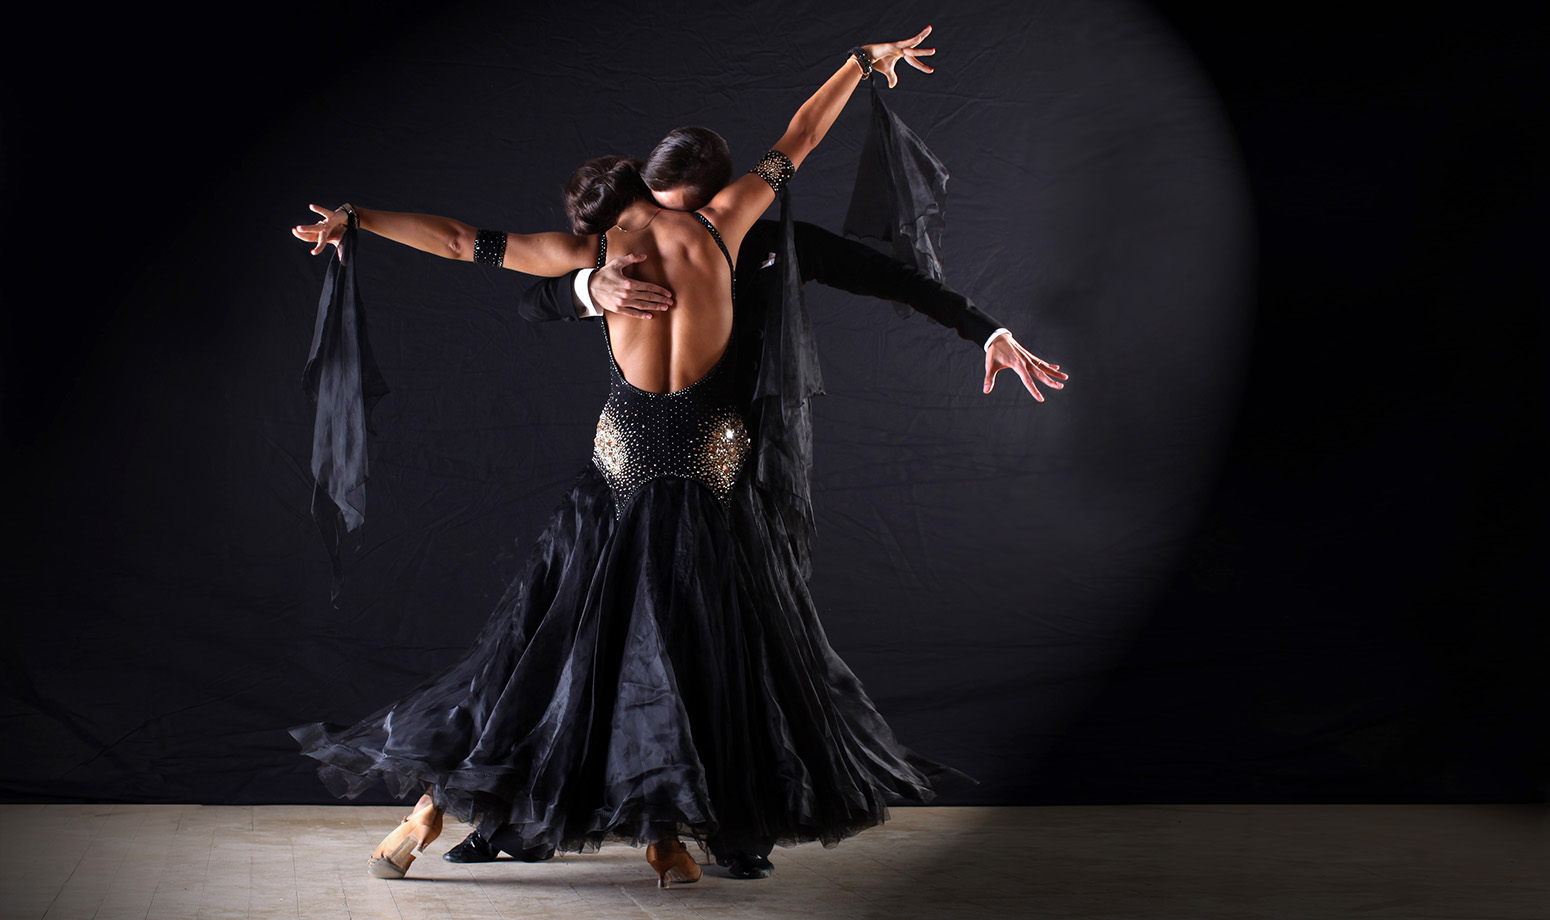 latin dance couple close pose with flowing dance dress